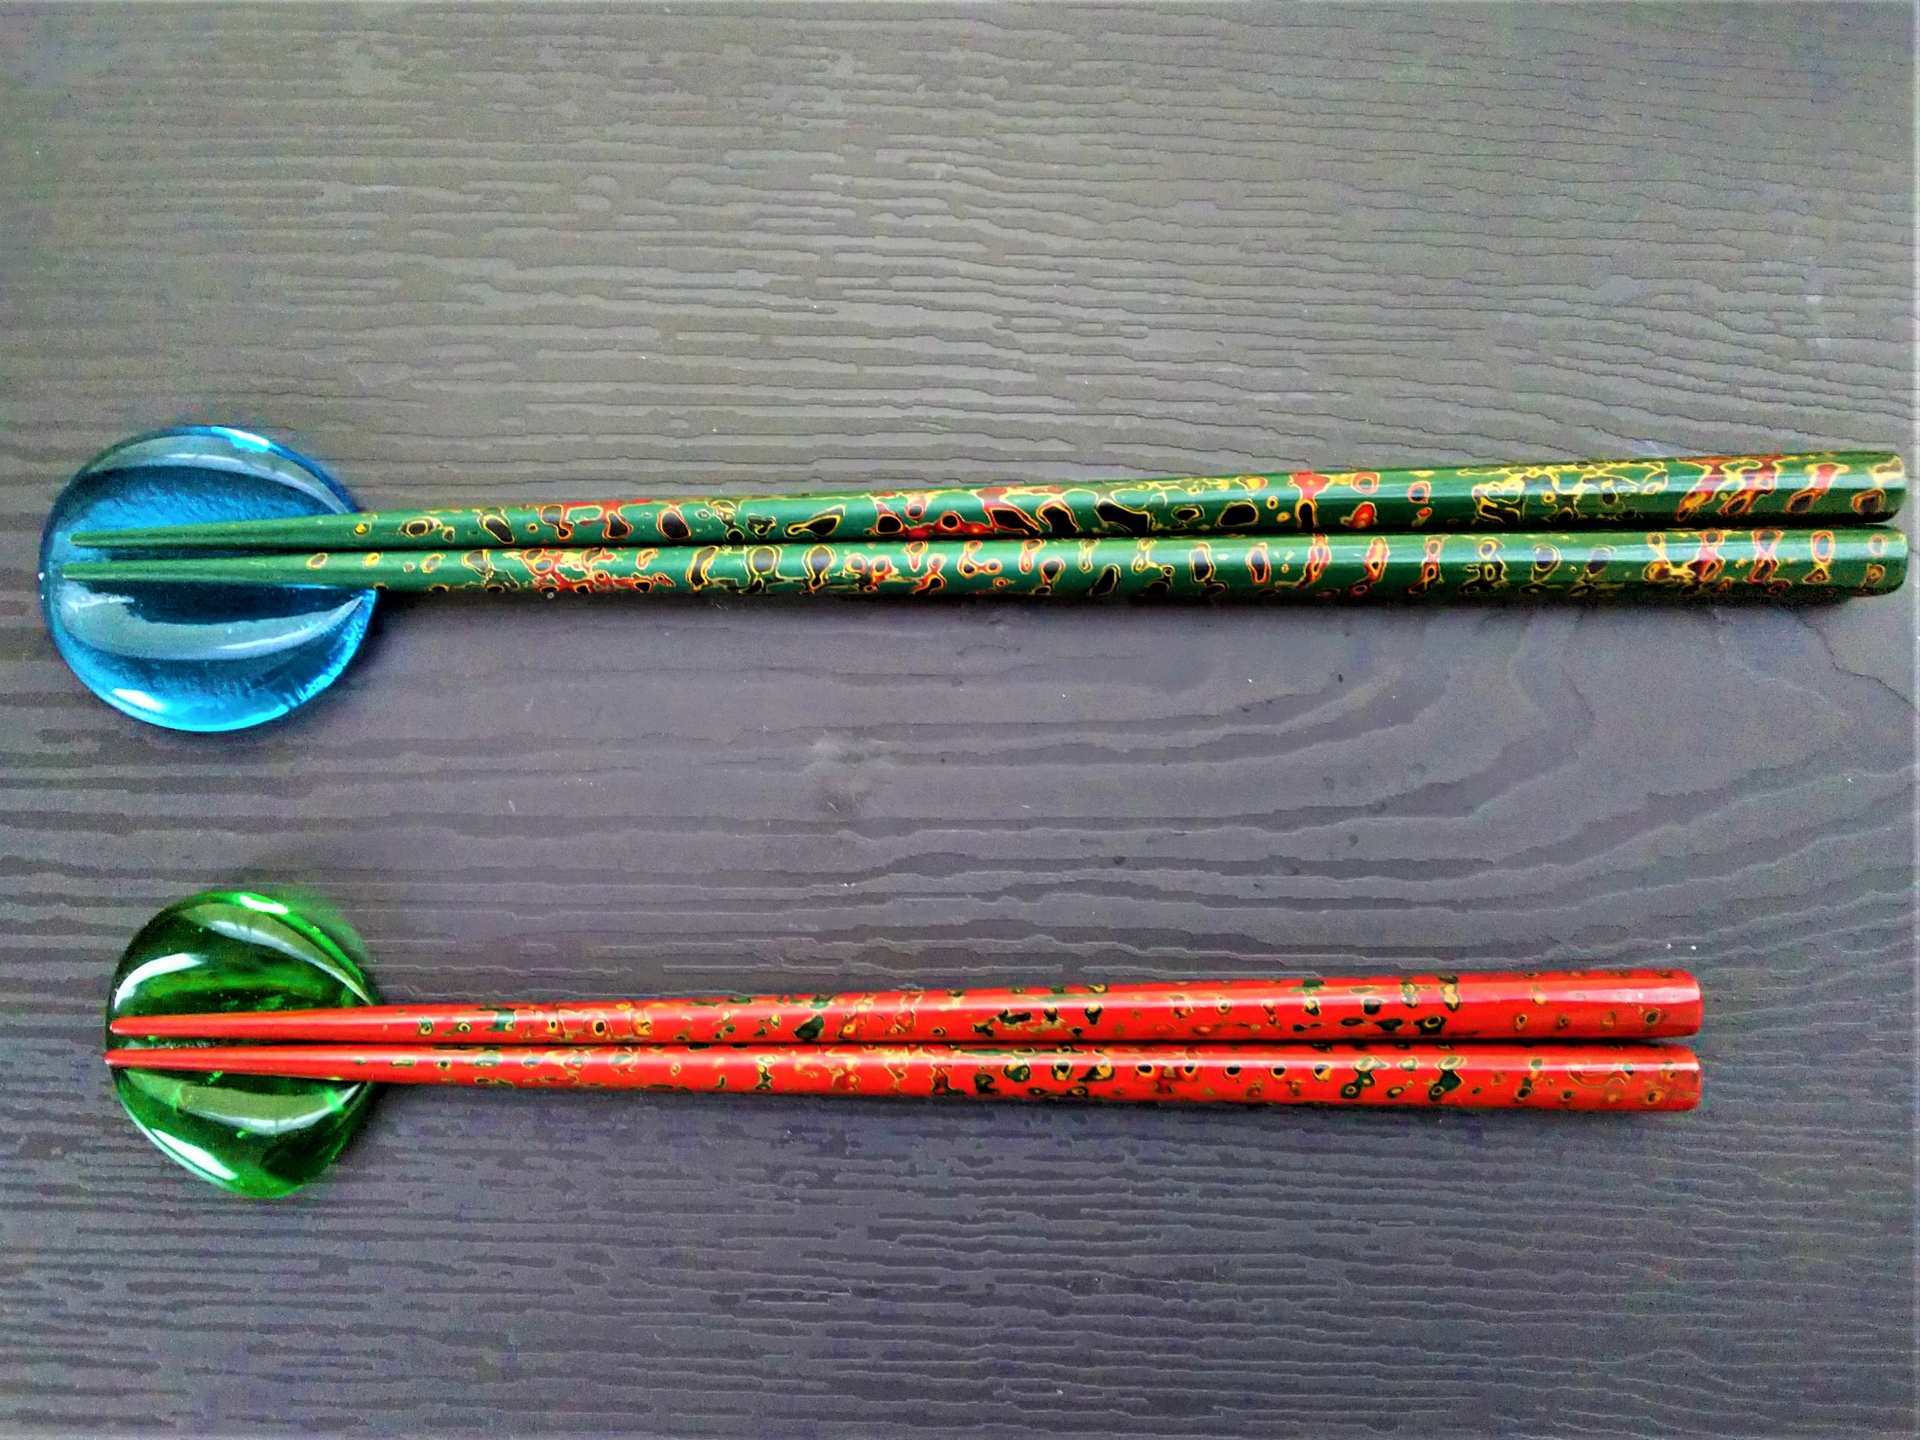 Two sets of Japanese traditional chop sticks: one is green; the other is red